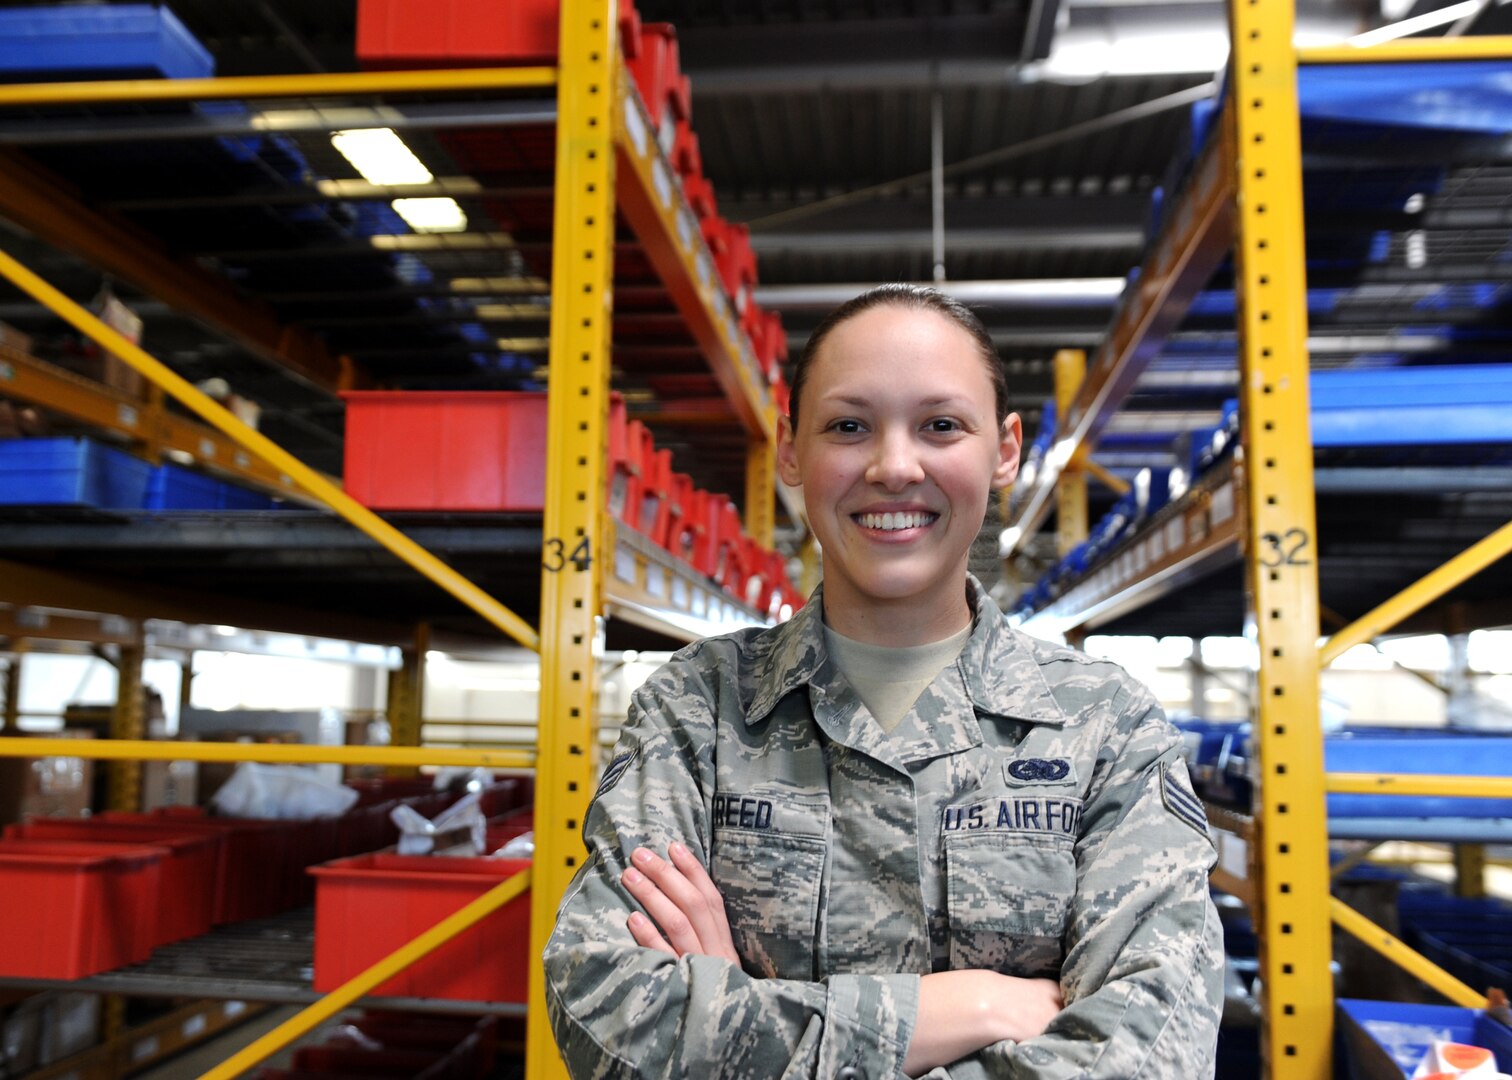 A smiling female stands in front of yellow shelves housing aircraft parts in a large warehouse.